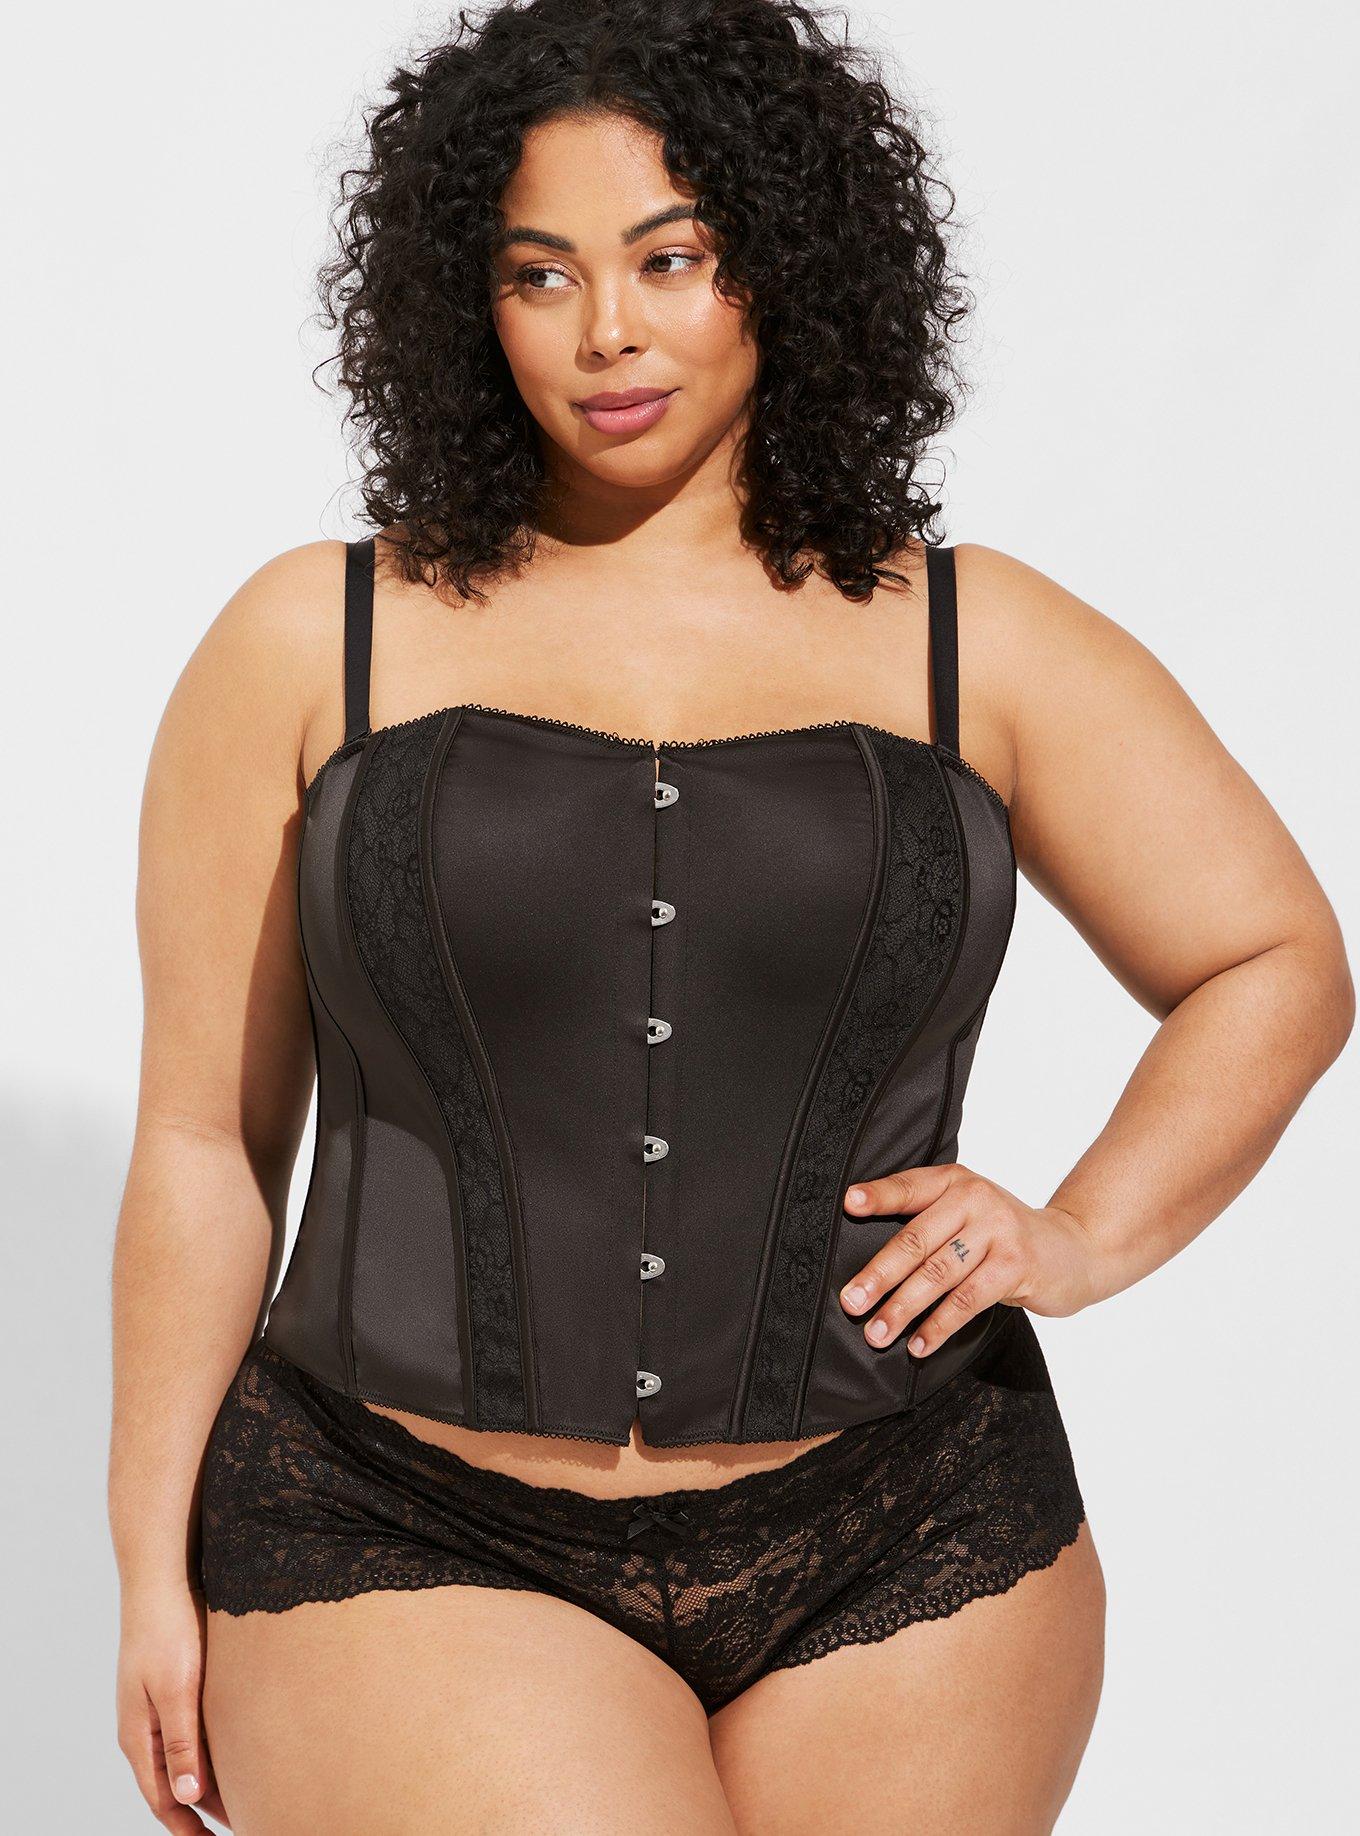 Shape Black Sheer Lace Structured Corset